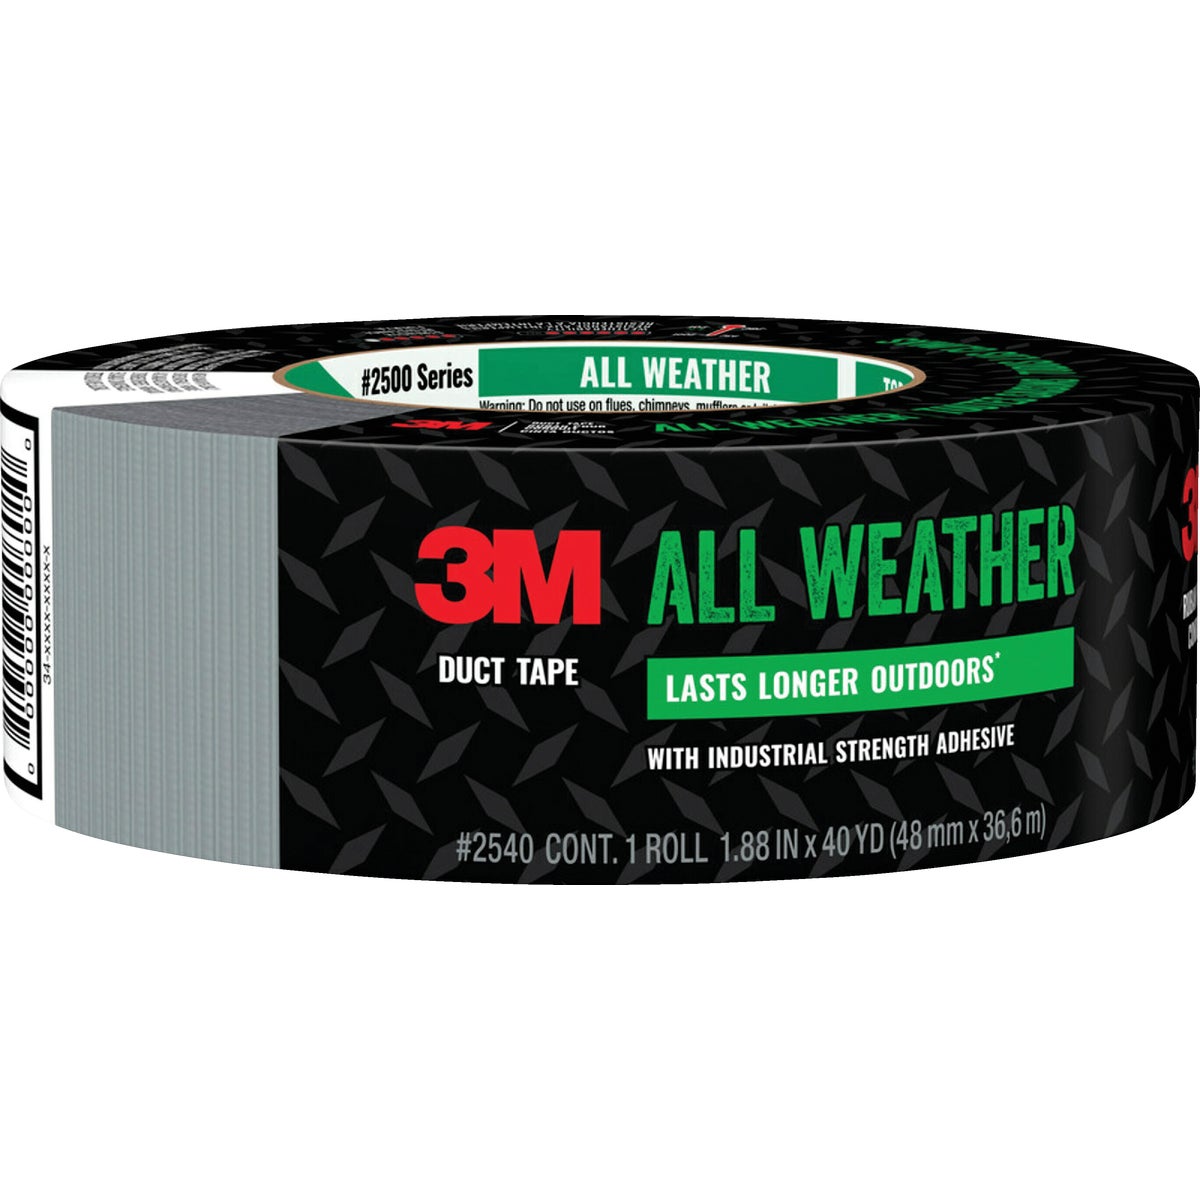 3M All Weather 1.88 In. x 40 Yd. Duct Tape